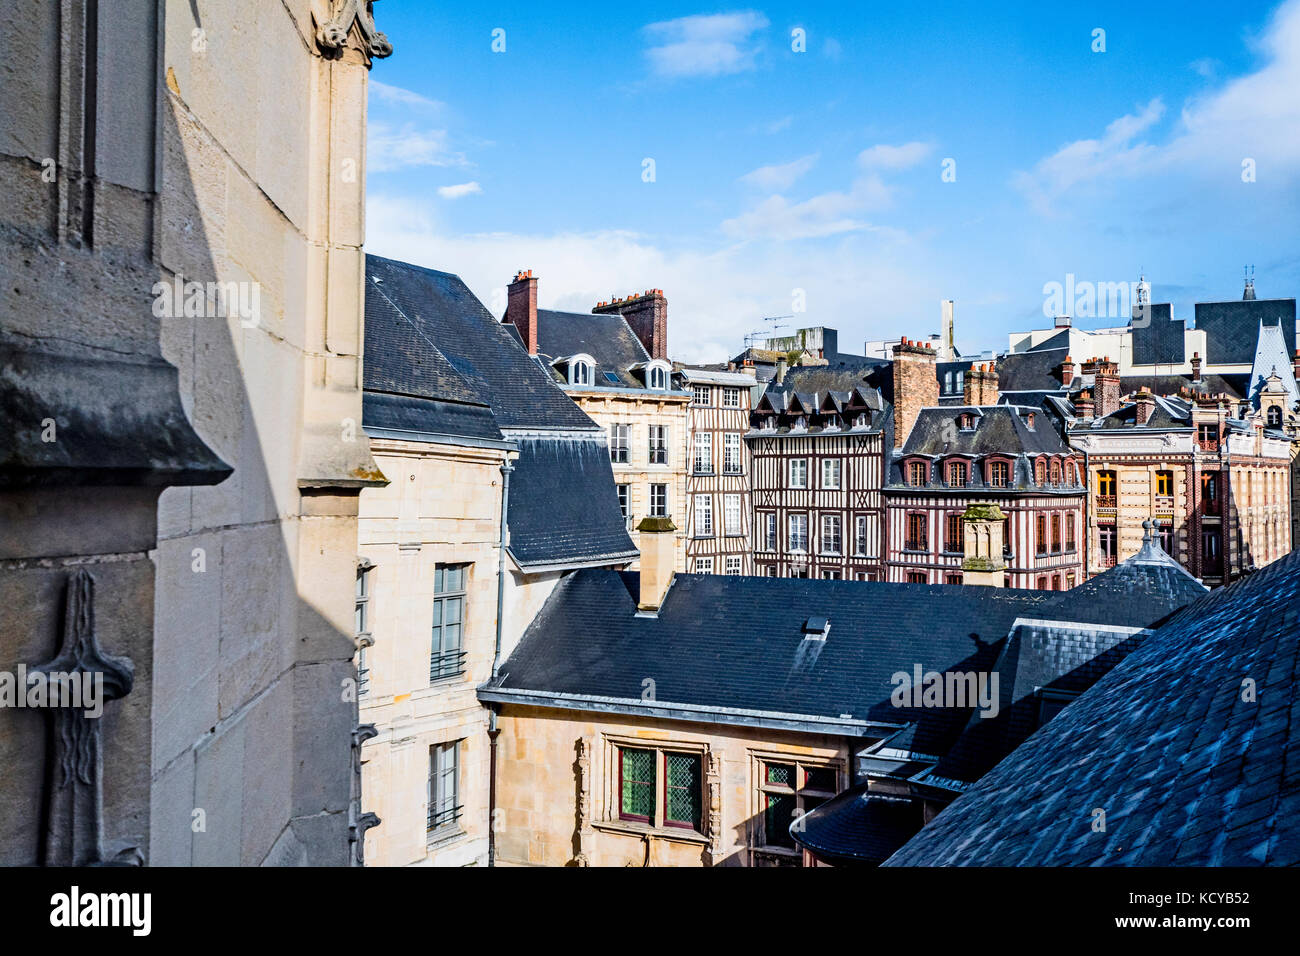 Rouen (Normandy, France): View on the town Stock Photo